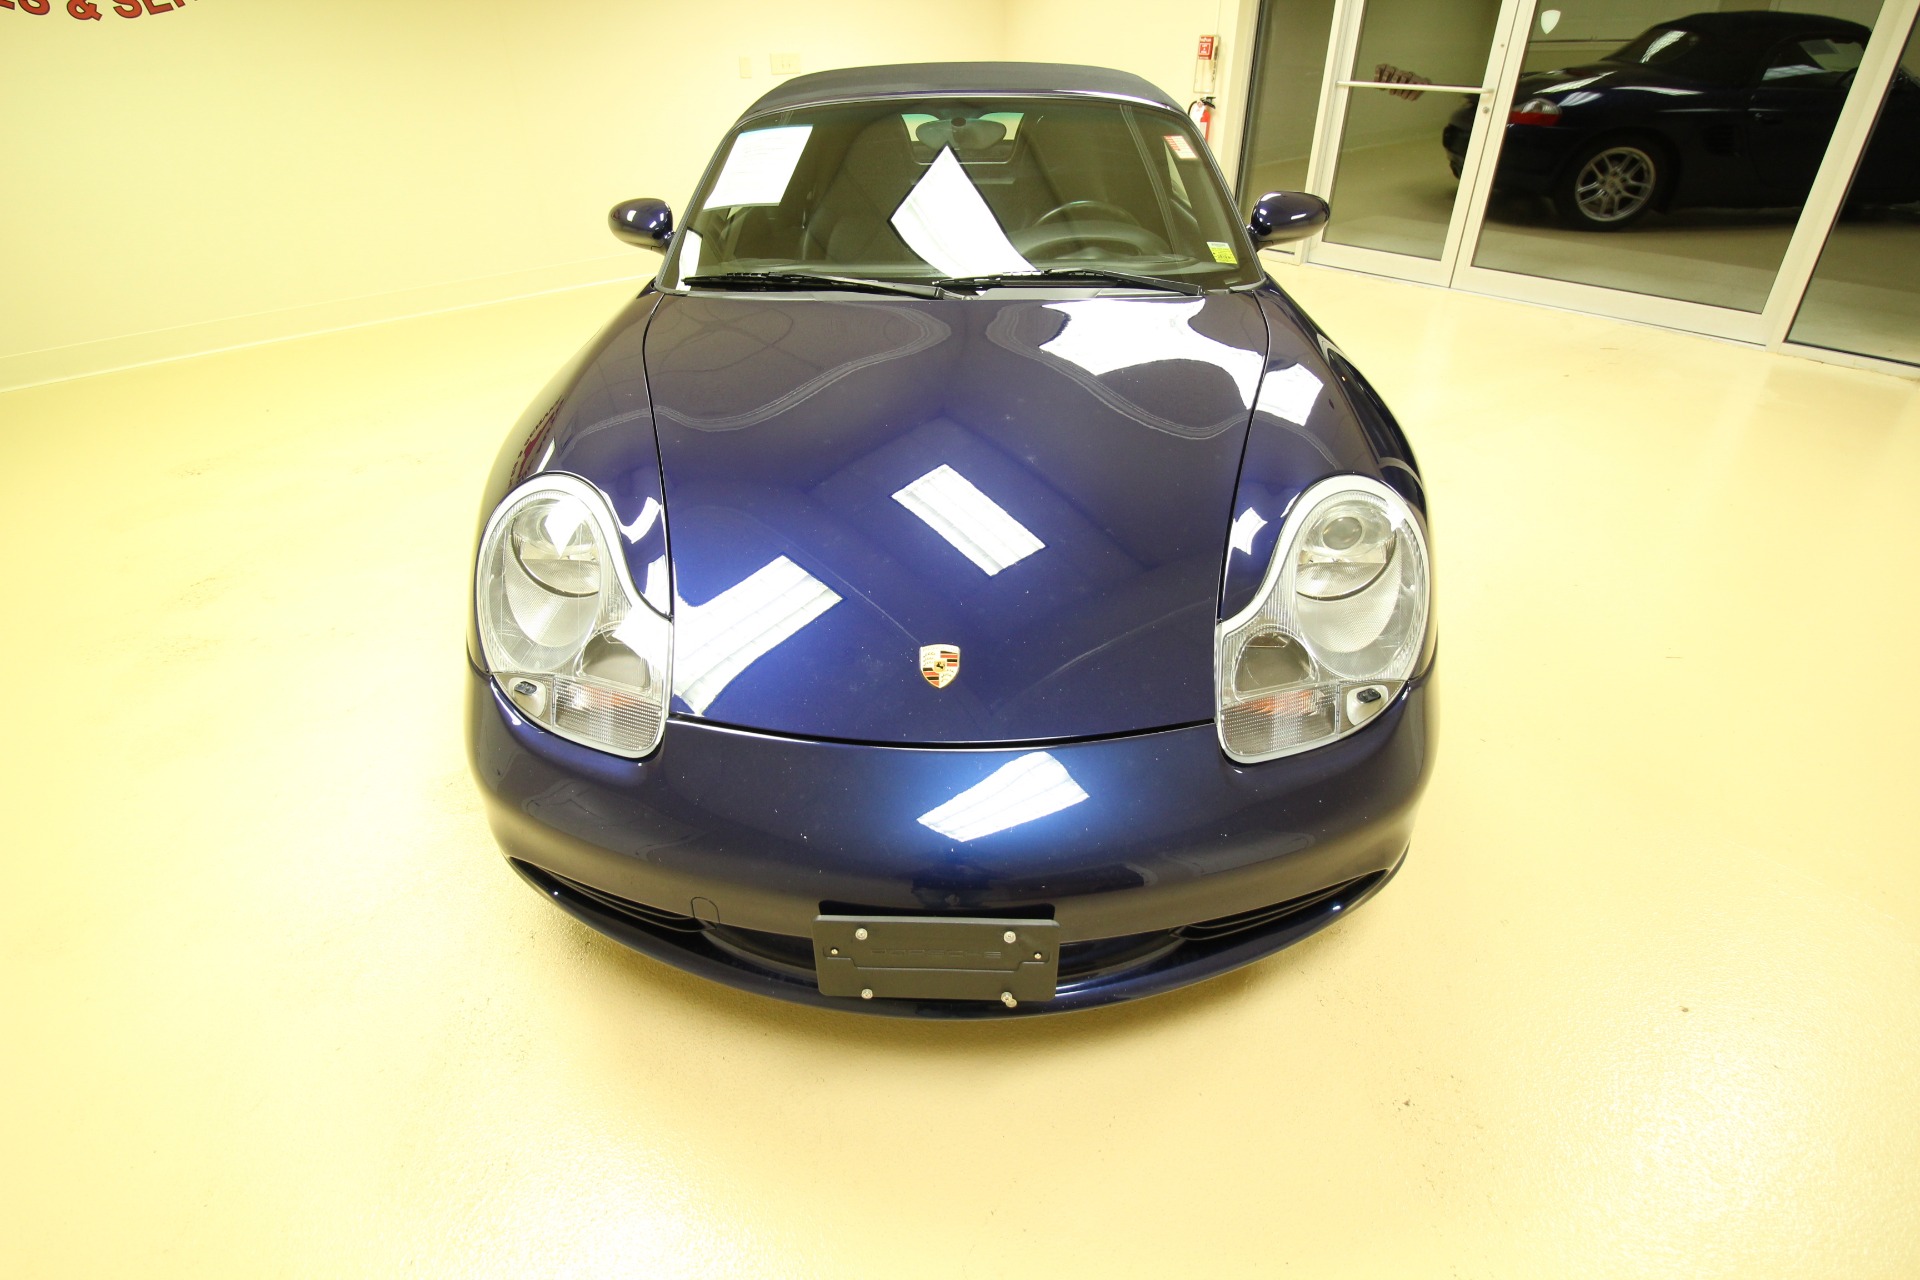 Used 2004 Cobalt Blue Metallic with Black Convertible Top Porsche Boxster Base | Albany, NY